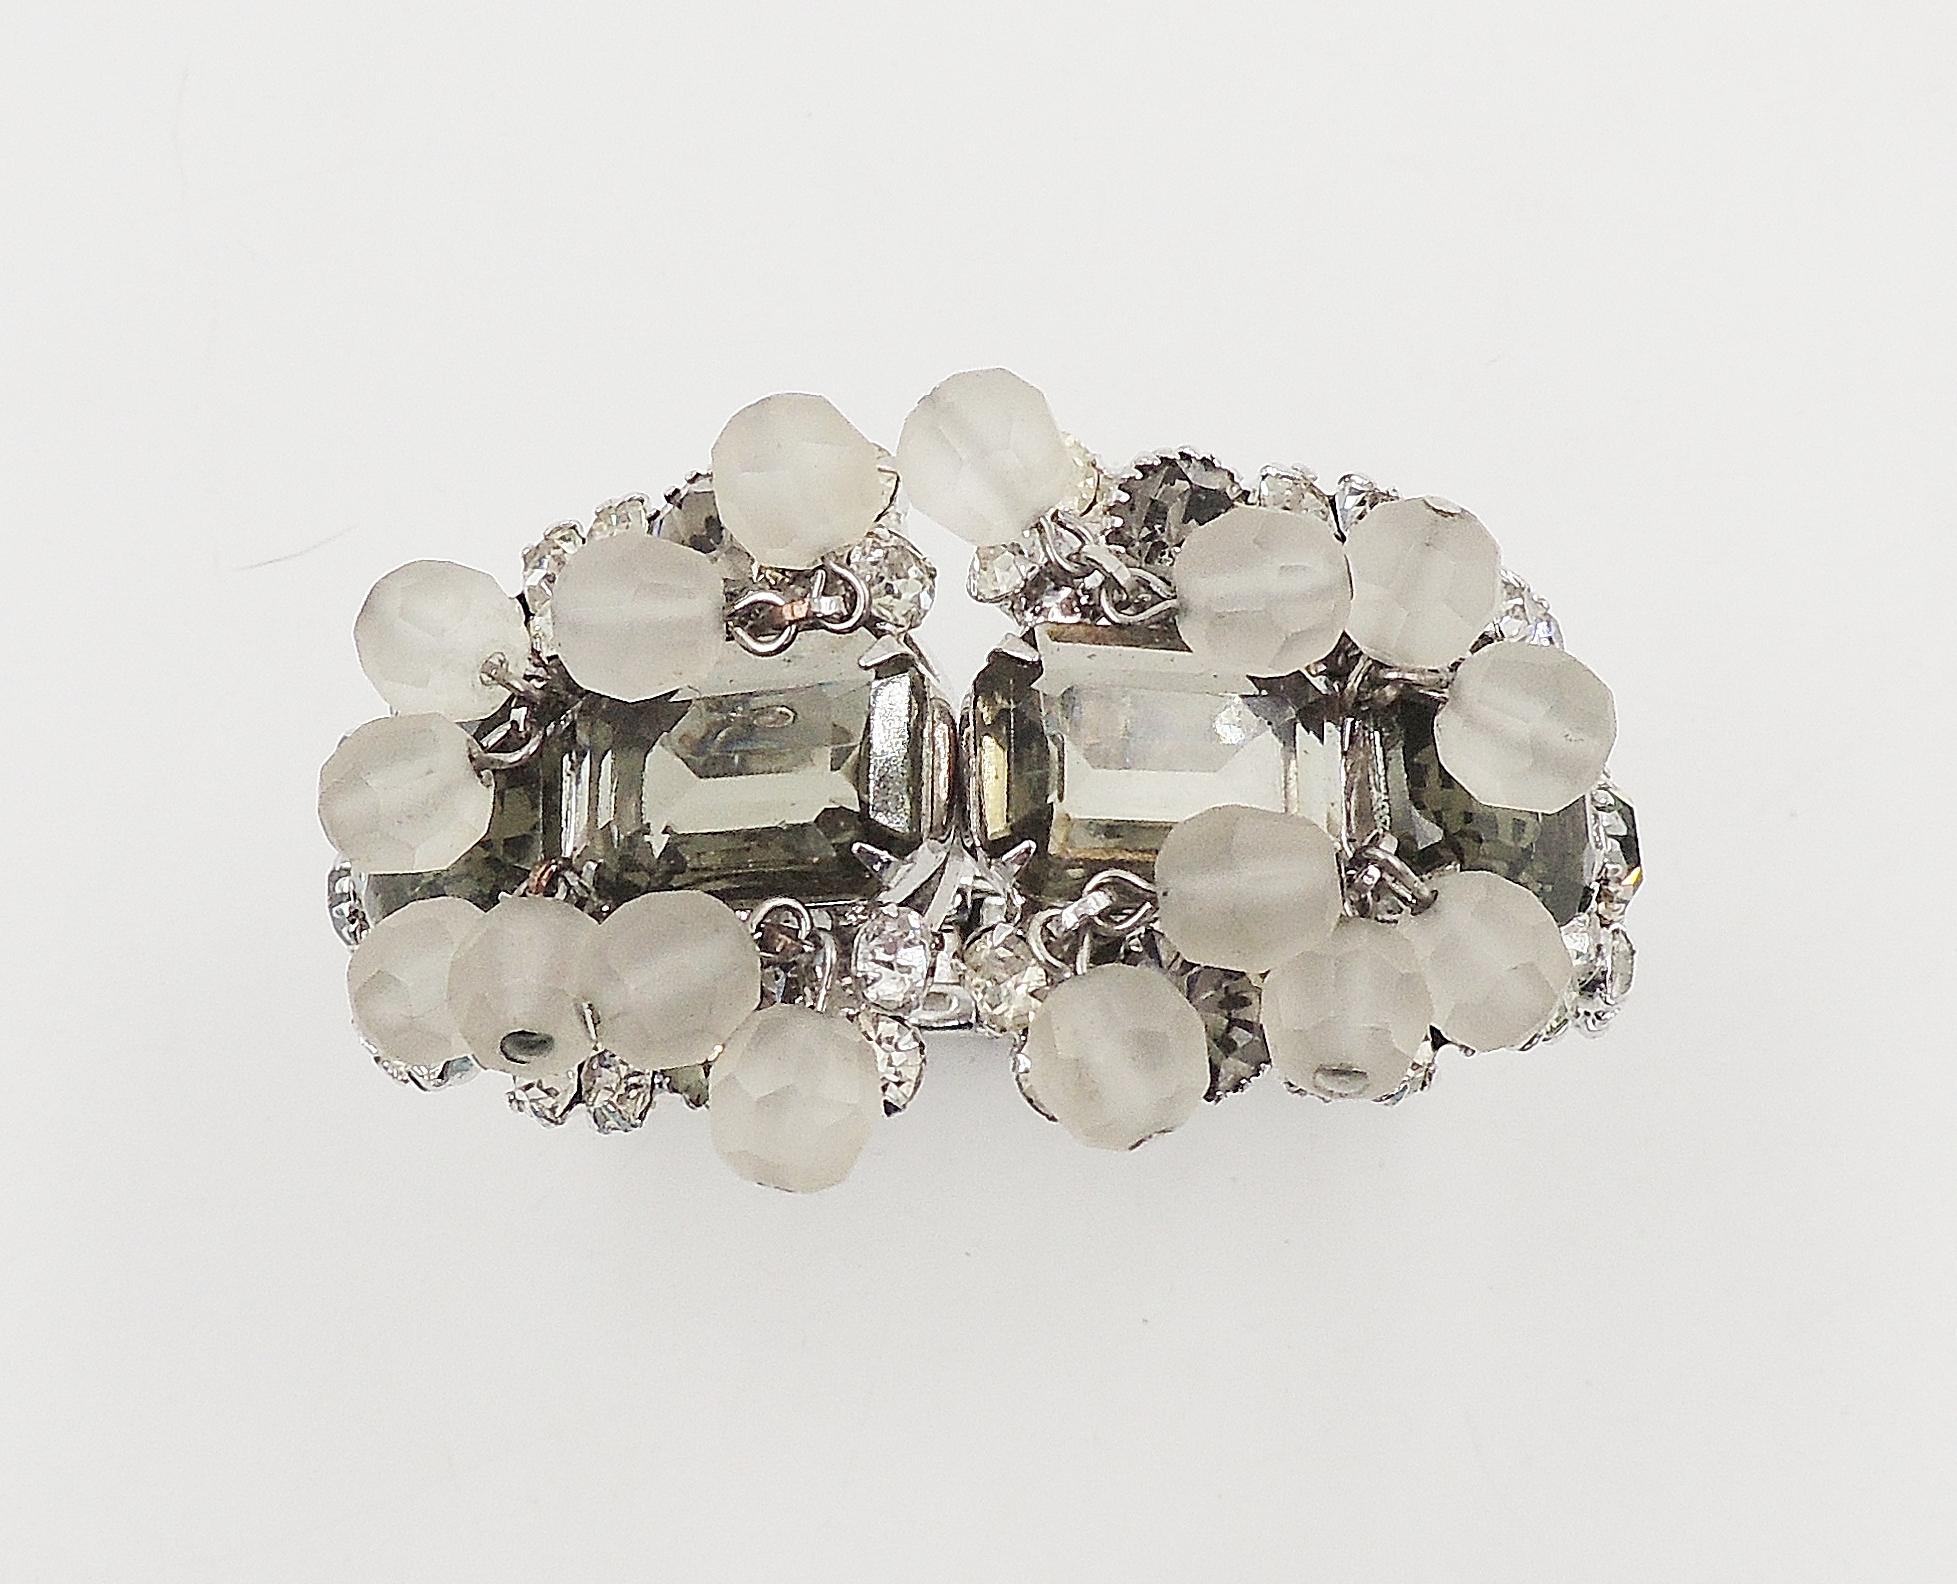 1960s silvertone hinged clamper bracelet with emerald-cut faux black diamond and round paste accents and frosted beads. Unsigned. Verified DeLizza & Elster. Interior, 6 3/4 inches circumference. Overall measures: 2 7/8 inches by 2 3/4 inches by 1